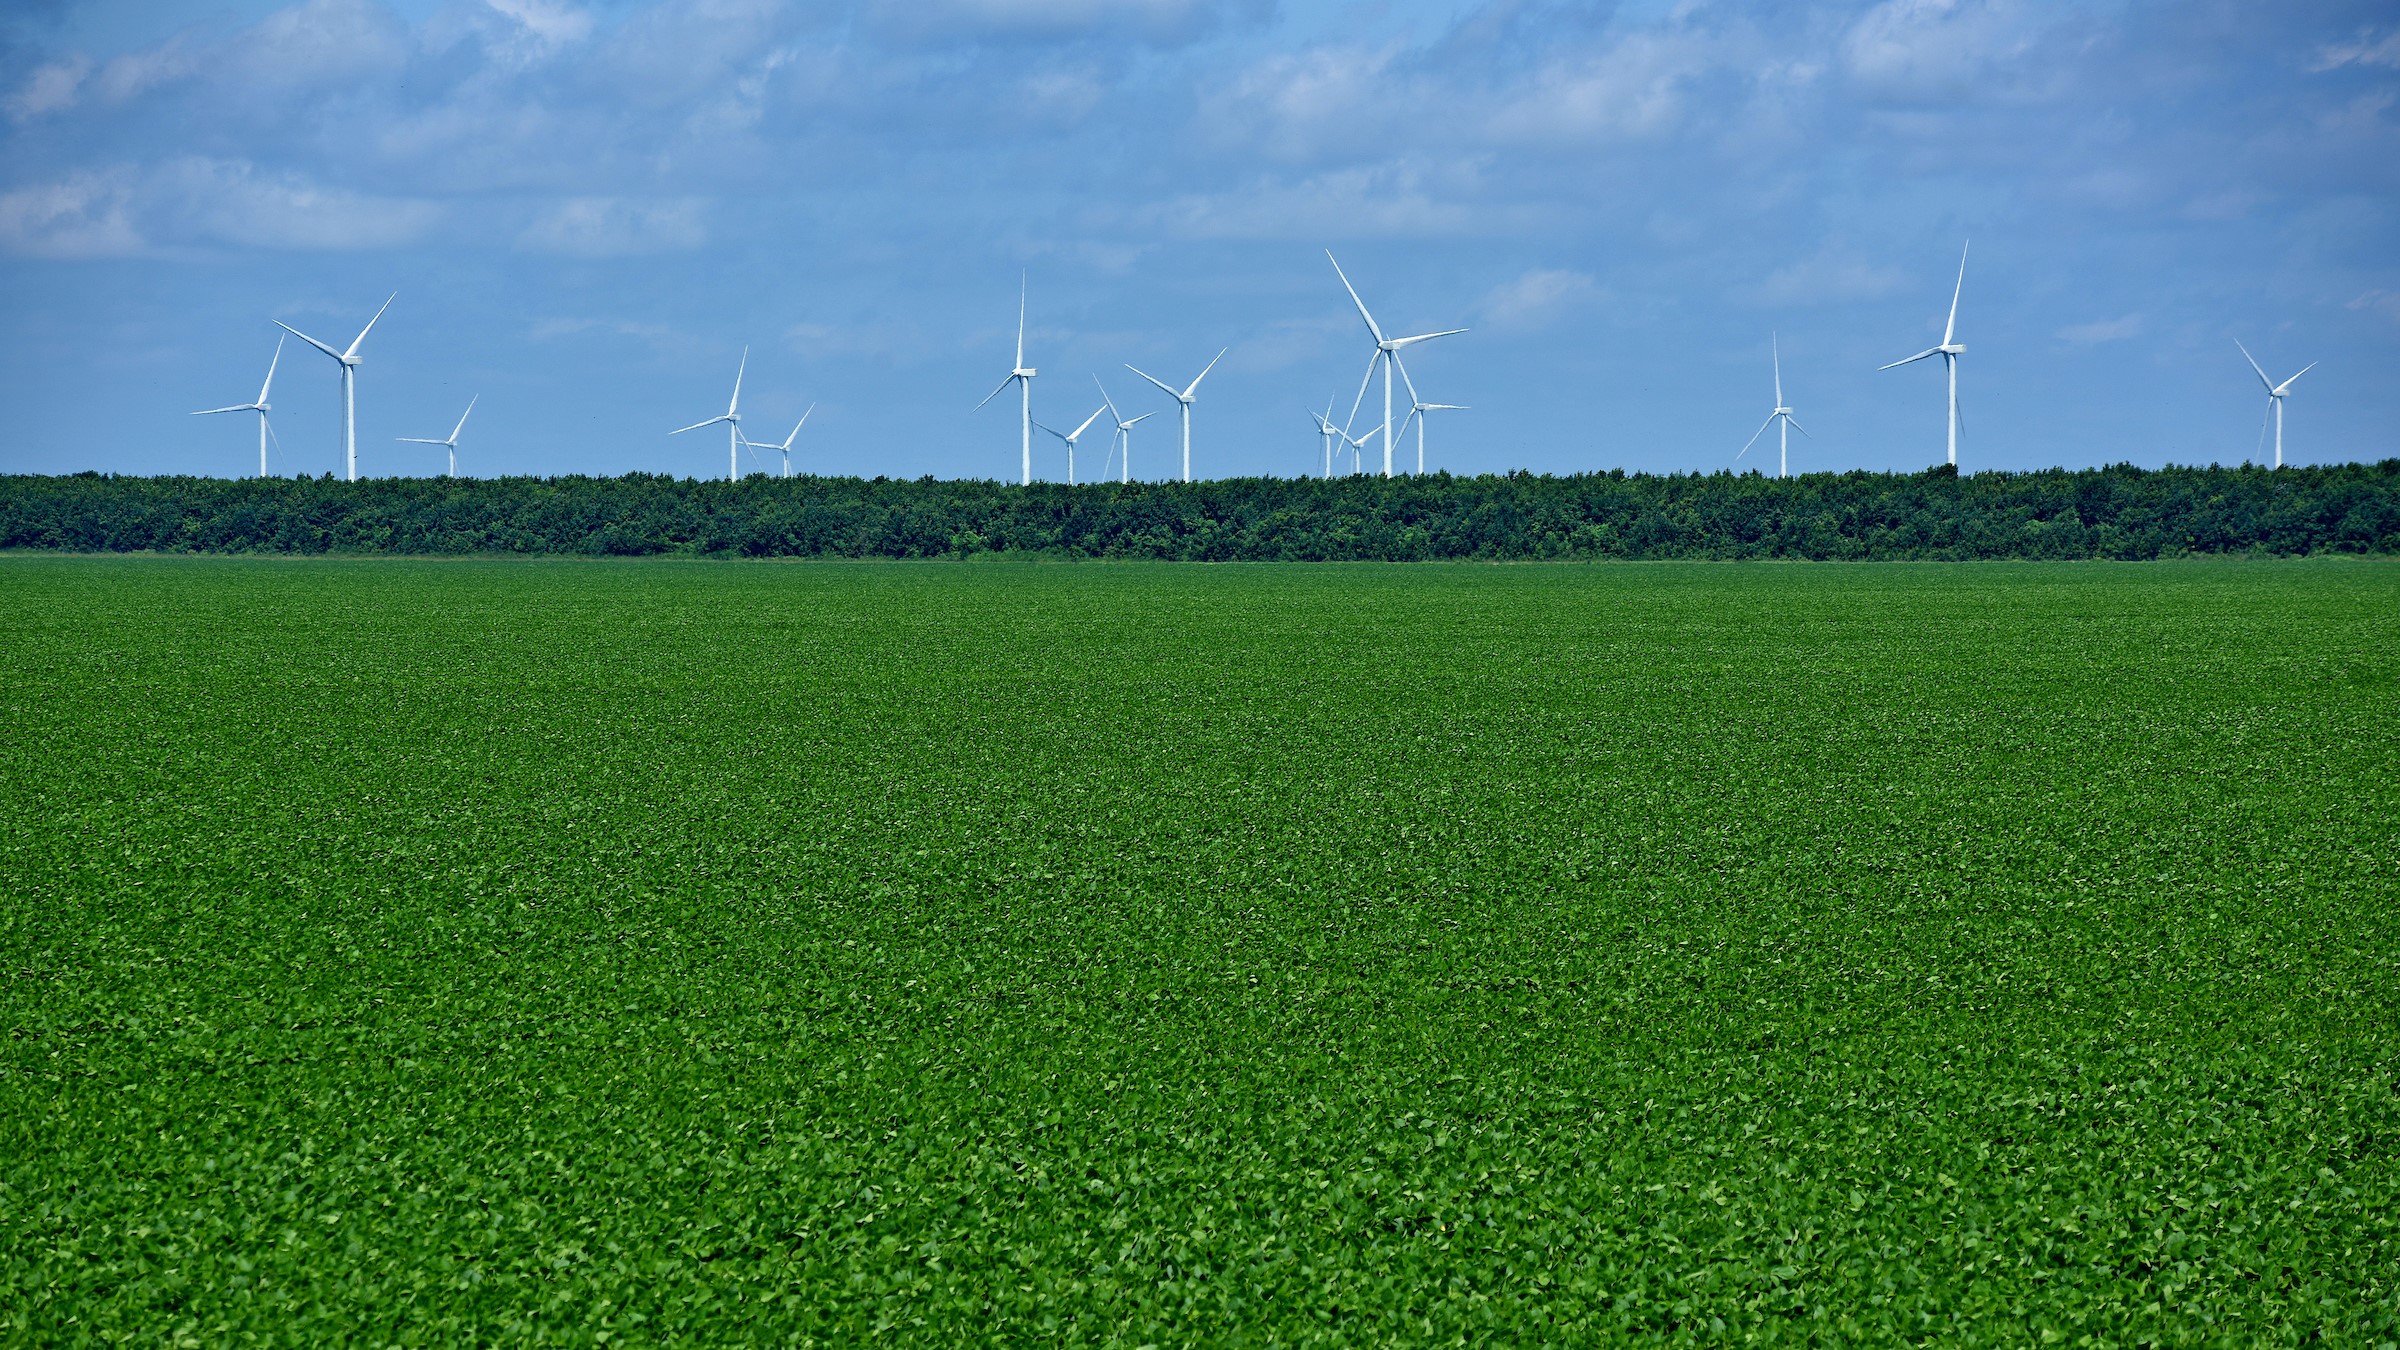 Energy-producing windmills rise up behind soy bean fields, harnessing electrical power from Pasquotank County wind.